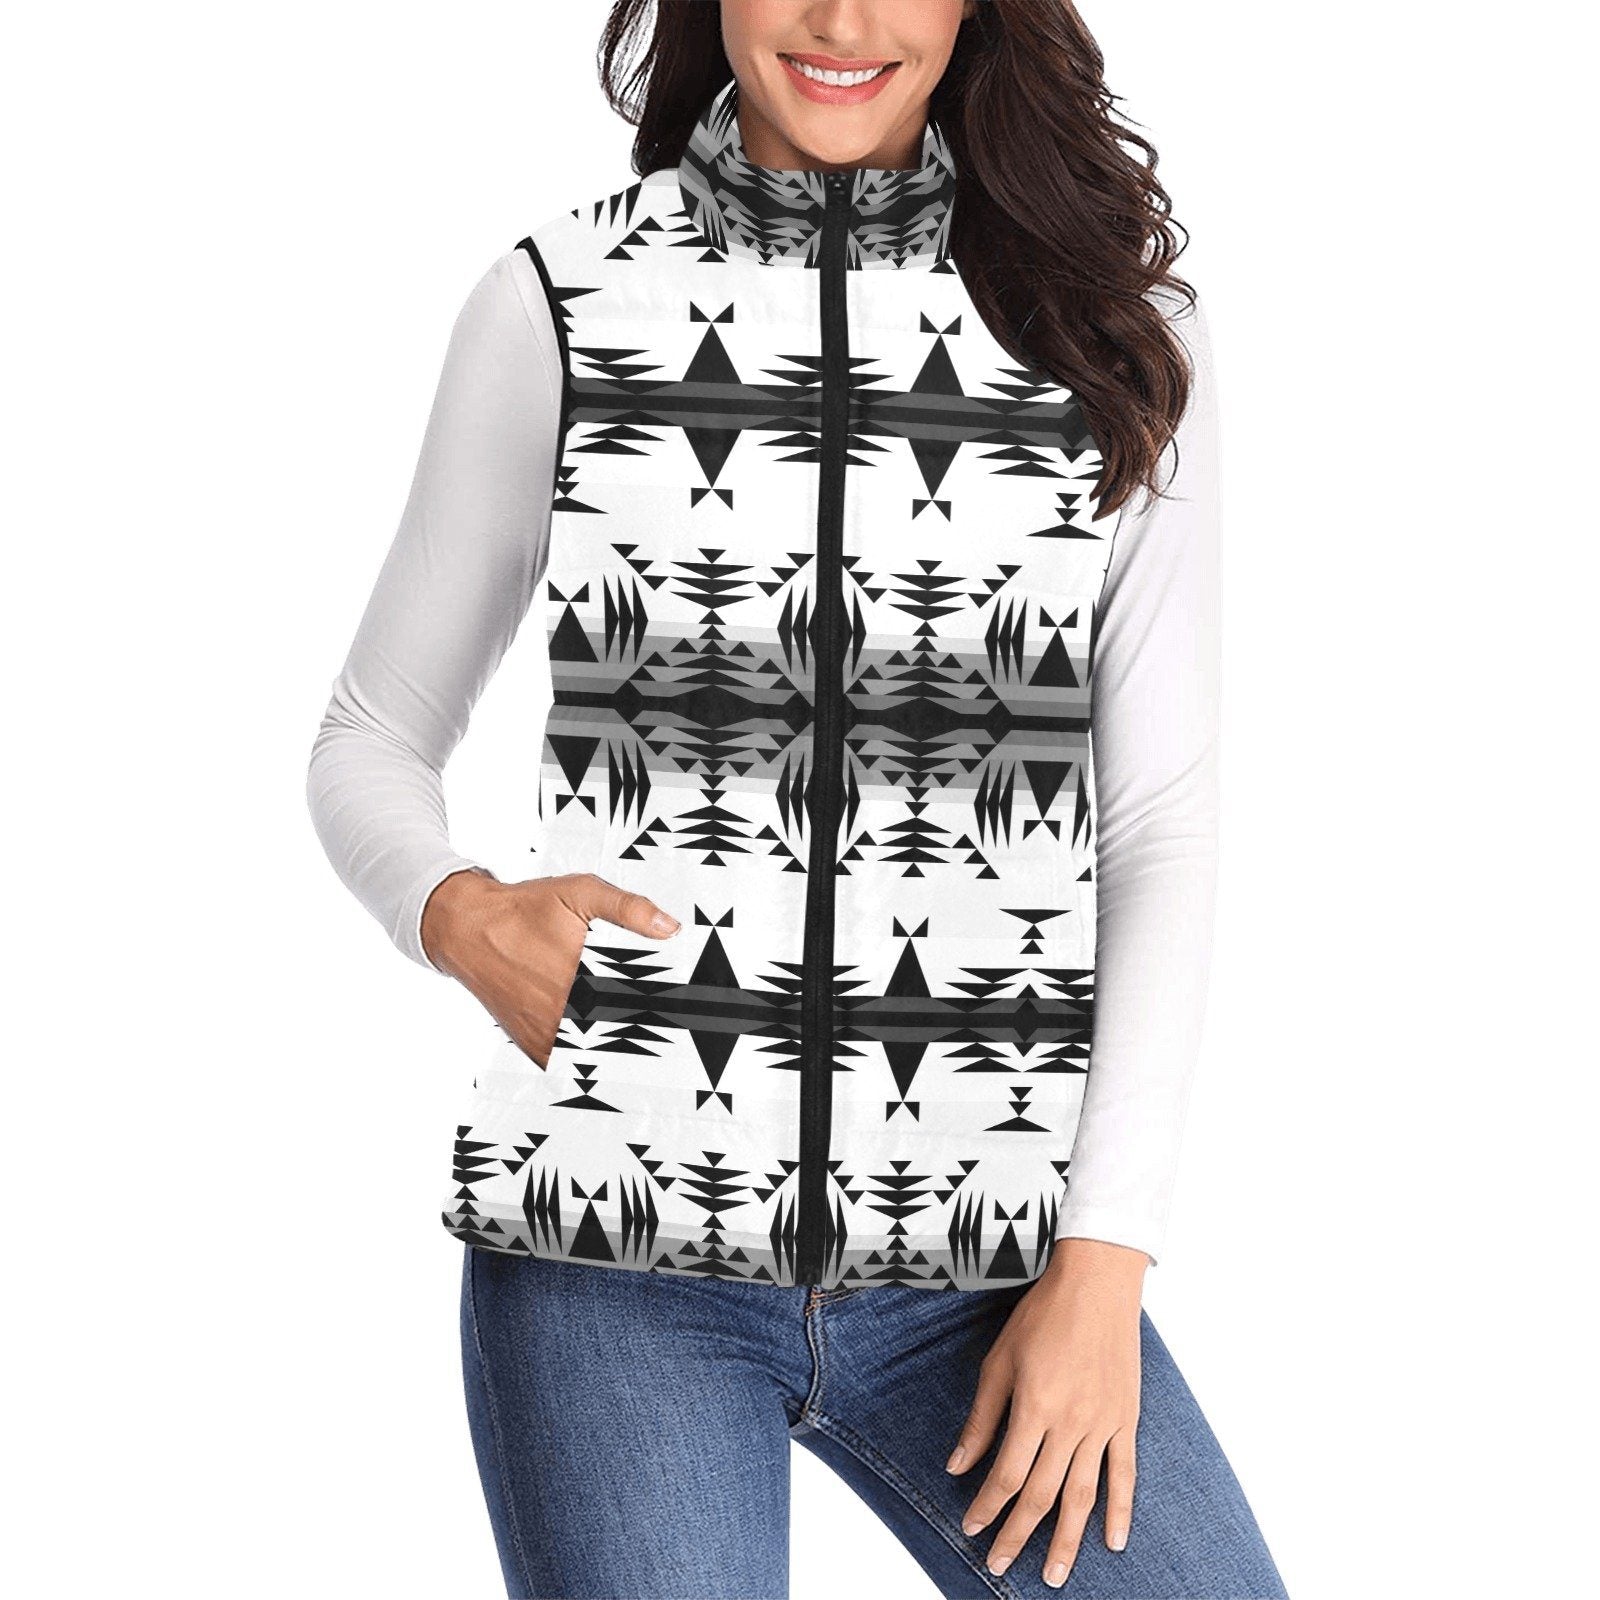 Between the Mountains White and Black Women's Padded Vest Jacket (Model H44) Women's Padded Vest Jacket (H44) e-joyer 